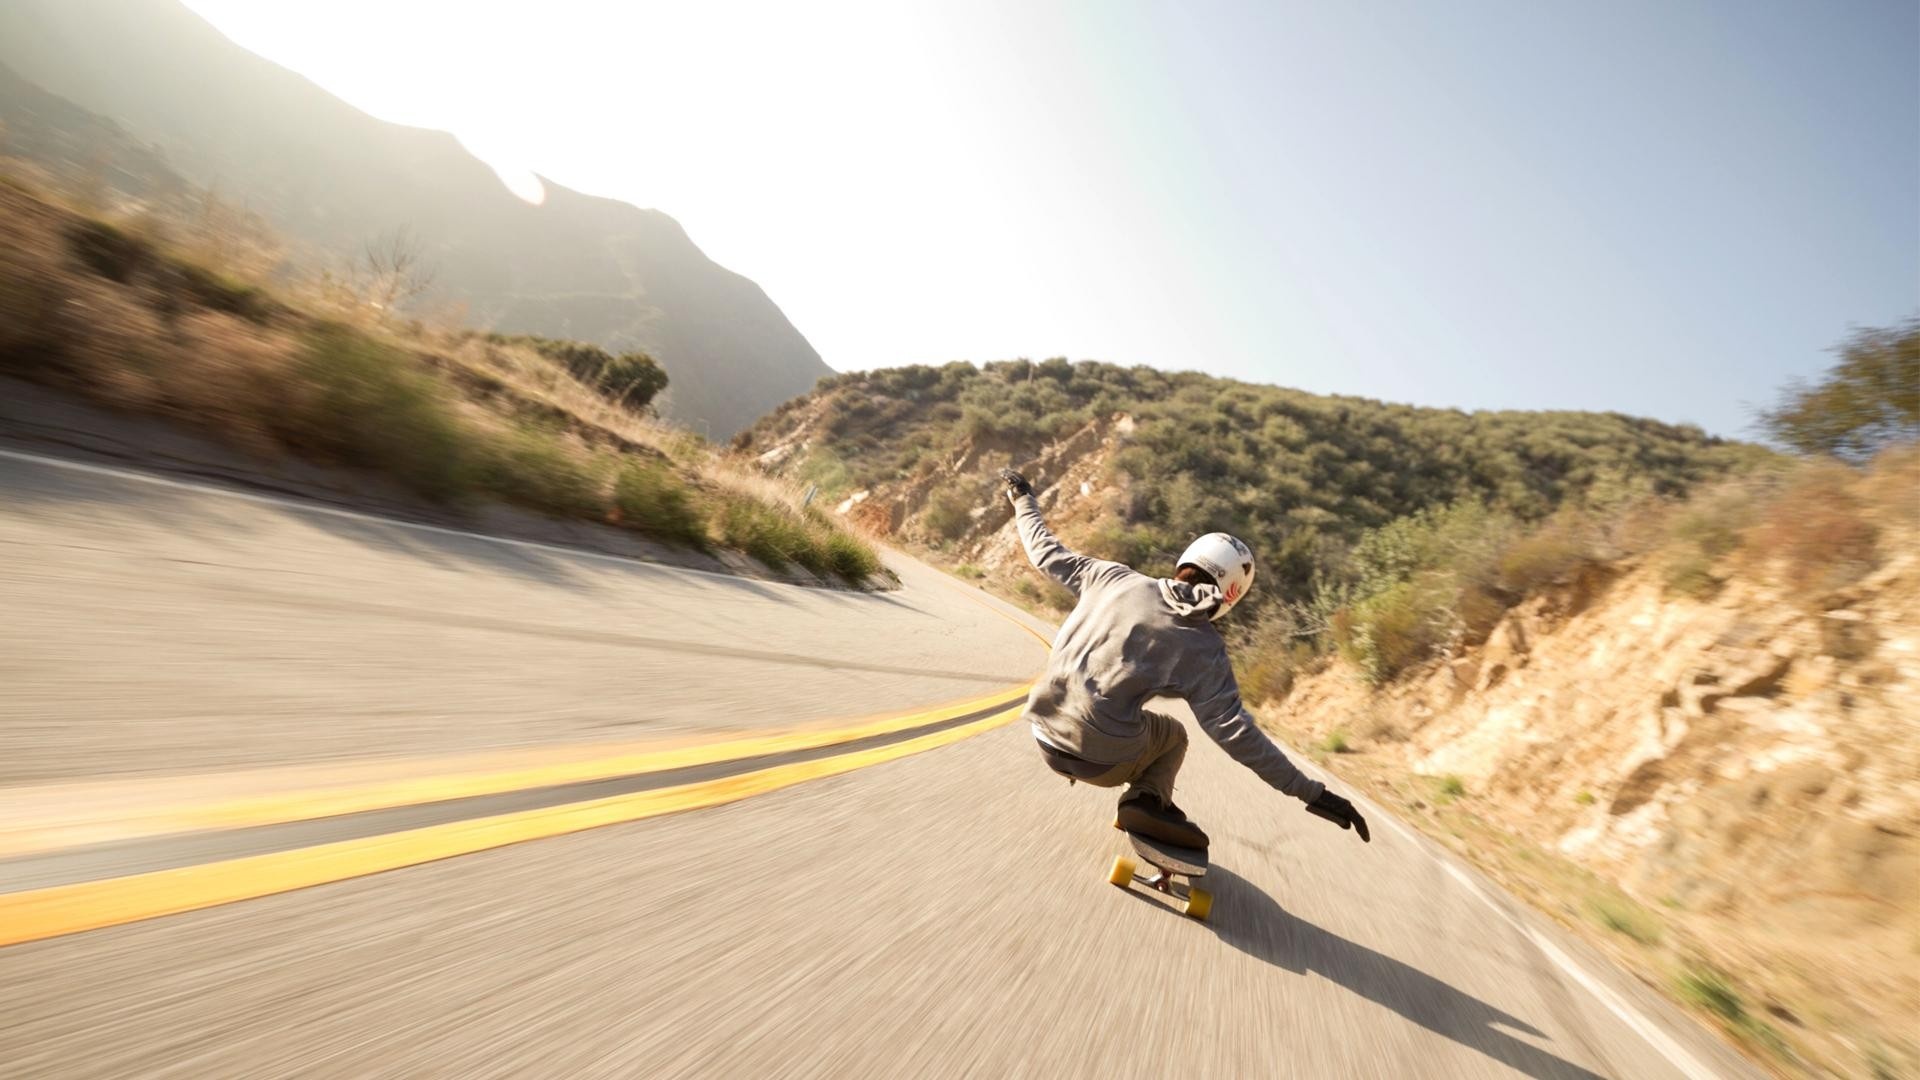 Downhill Longboarding Wallpaper Quotes